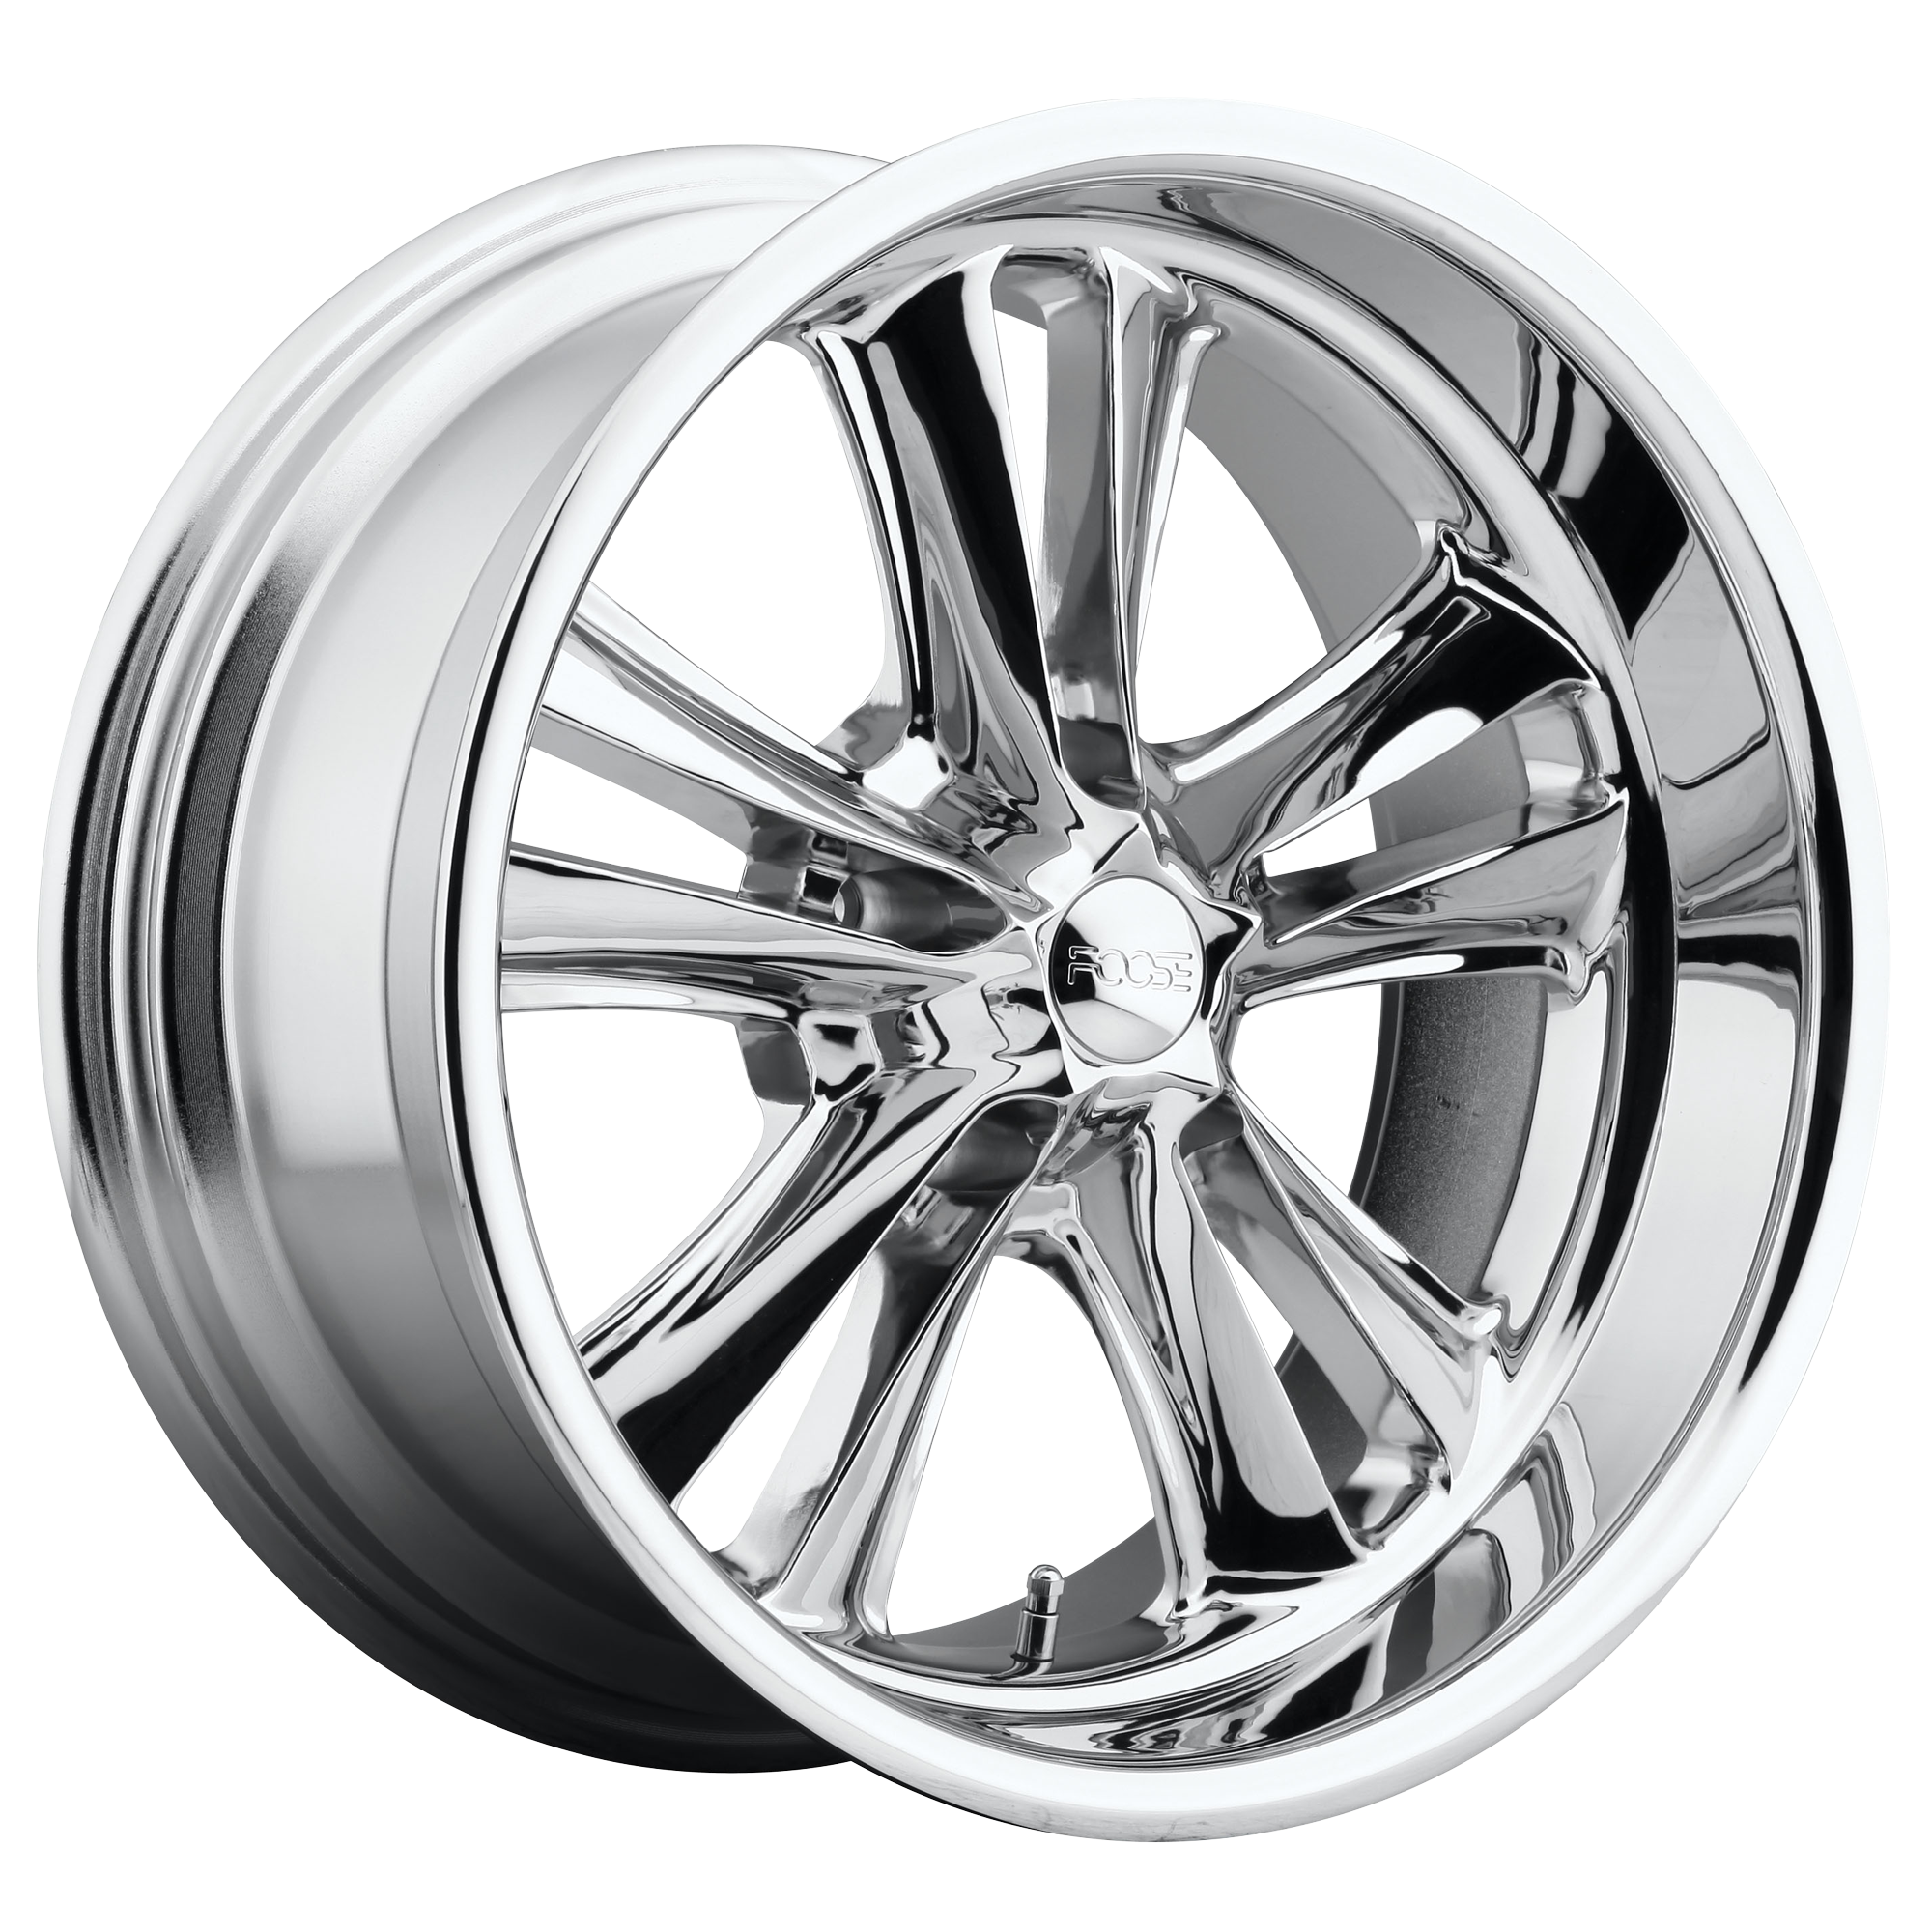 KNUCKLE 18x9.5 5x114.30 CHROME PLATED (1 mm) - Tires and Engine Performance